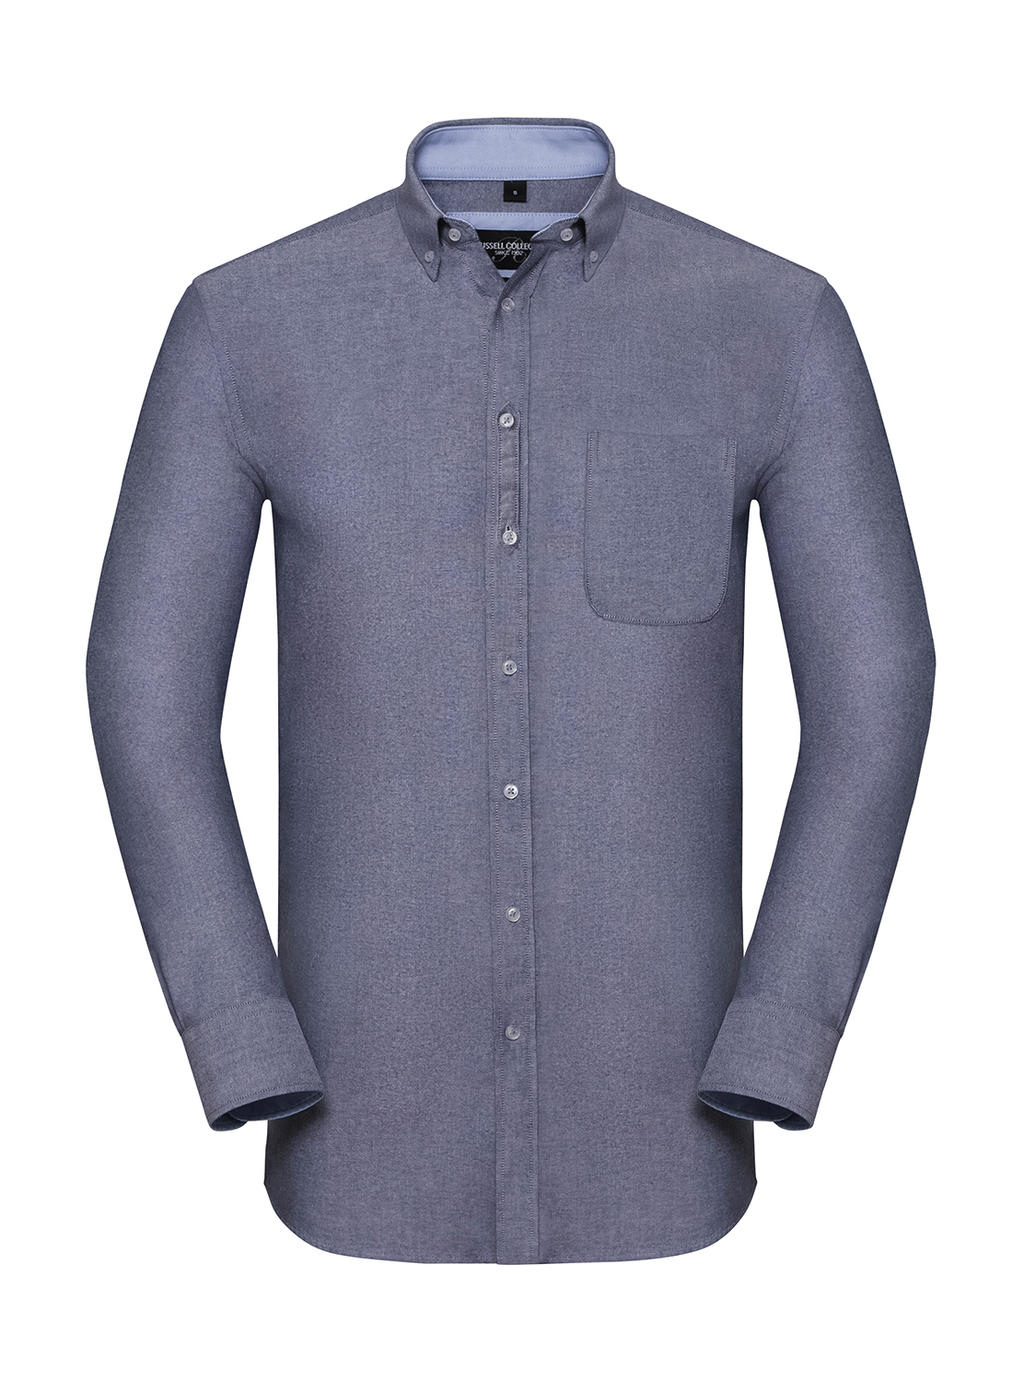  Mens LS Tailored Washed Oxford Shirt in Farbe Oxford Navy/Oxford Blue